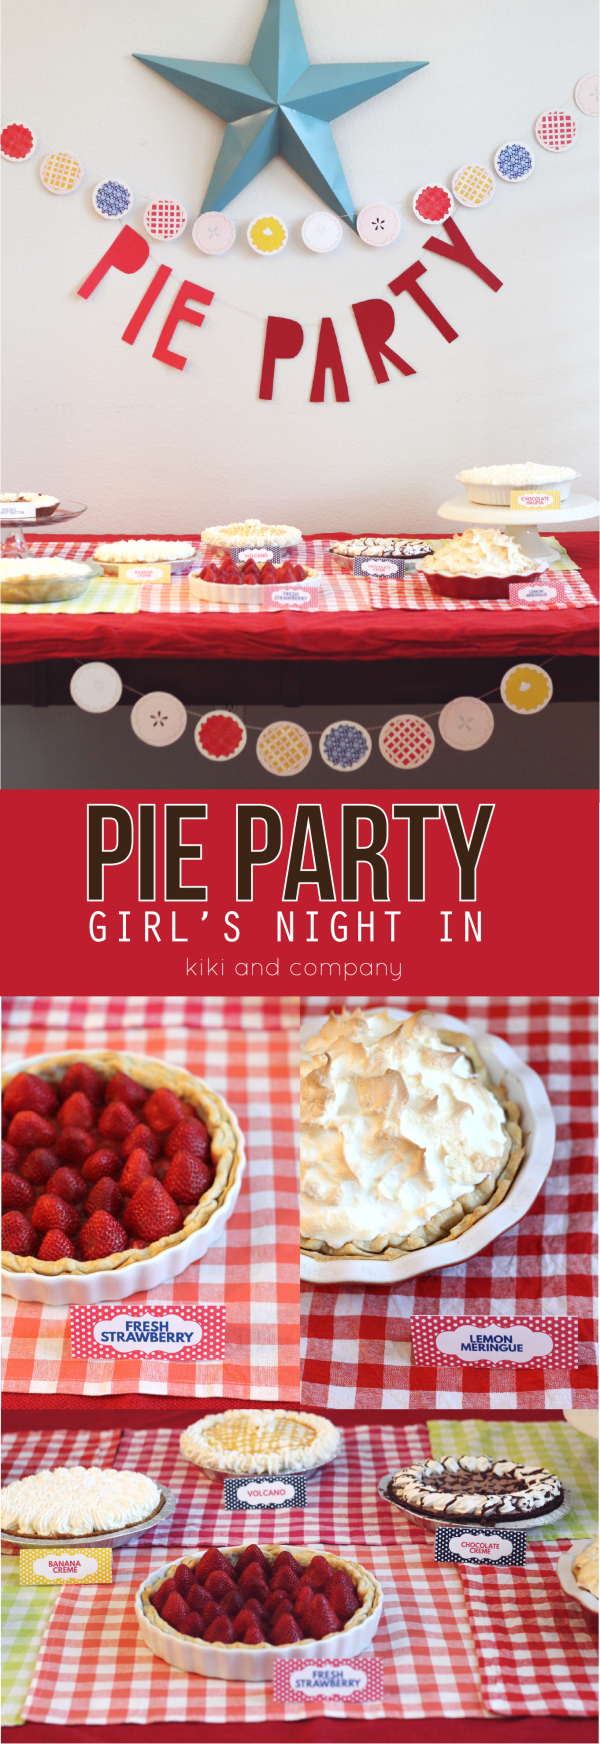 Pie Party Girls Night in at kiki and company